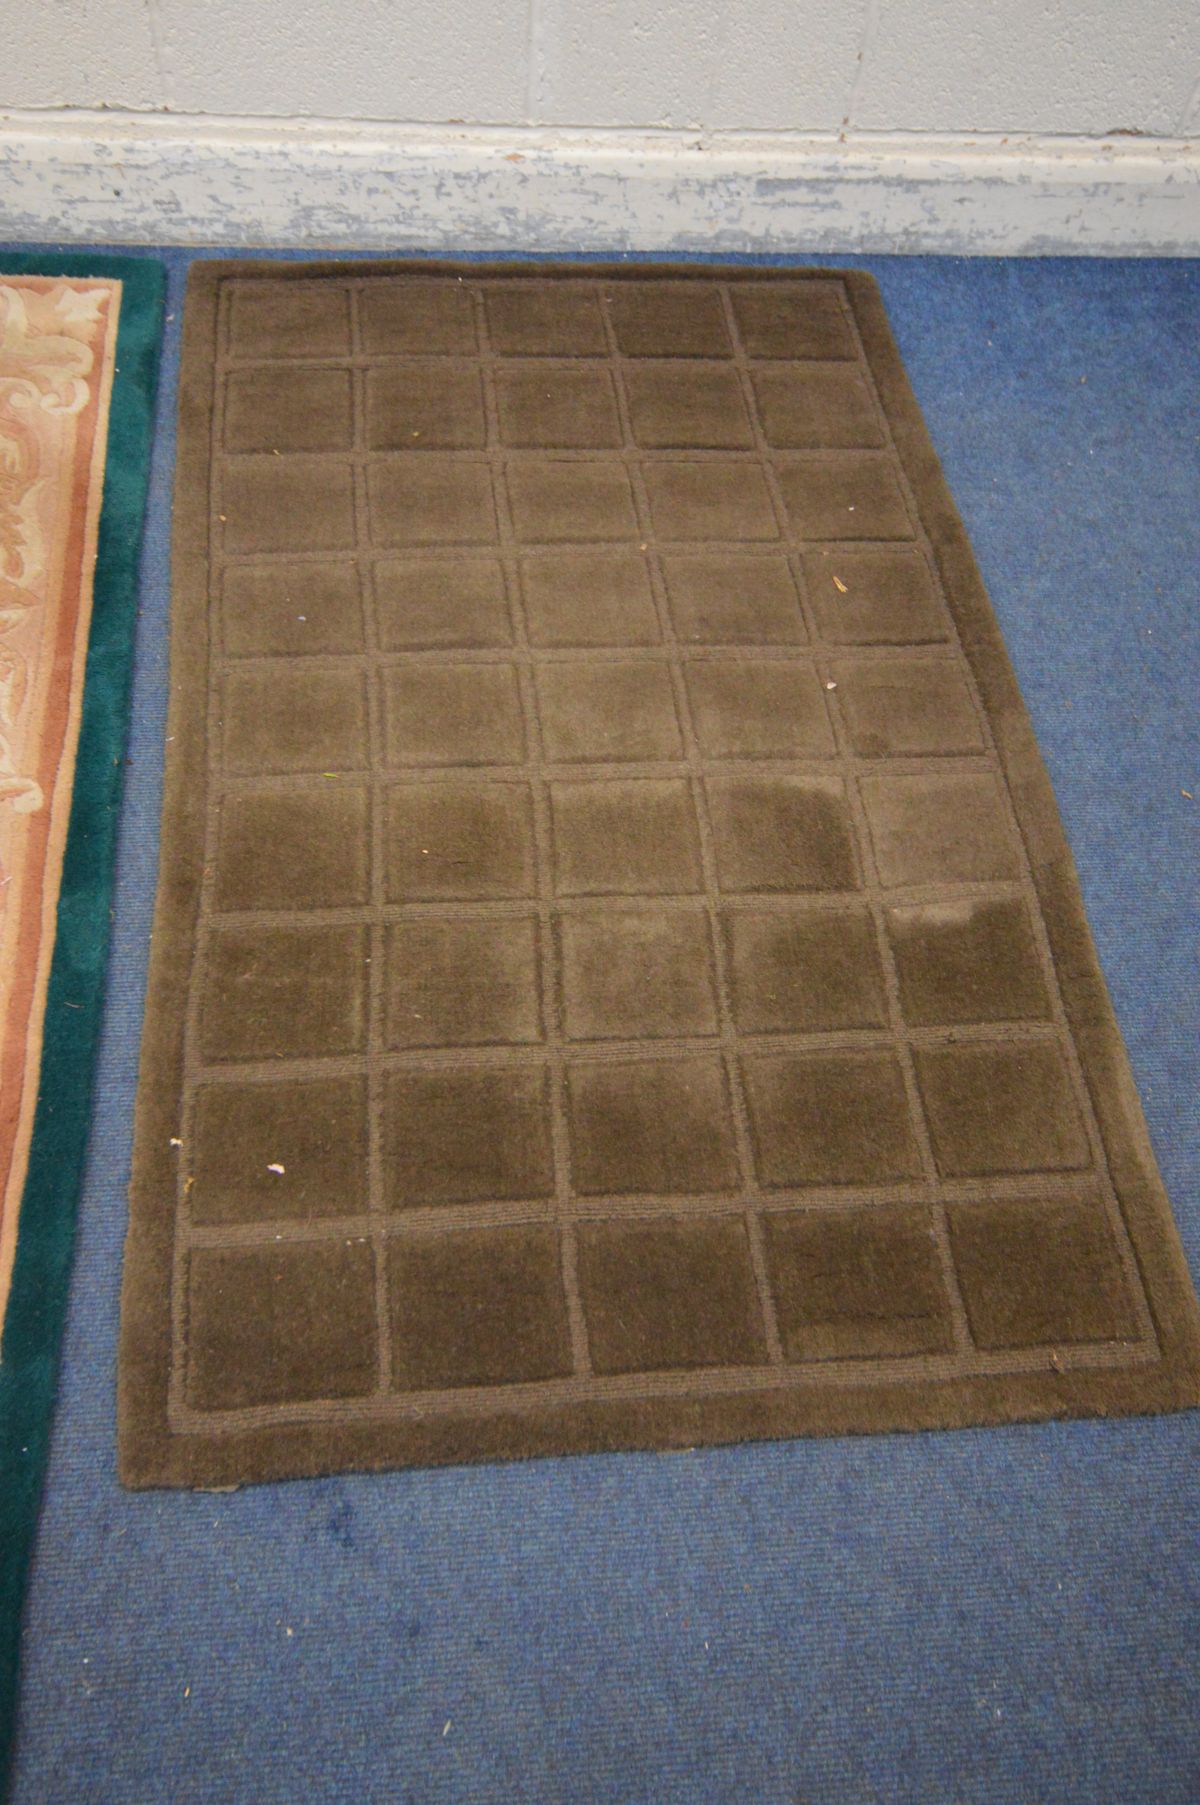 A LARGE GREEN CHINESE WOOLEN RUG, 240cm x 150cm, two similar cream and green ground rugs, both 180cm - Image 4 of 4